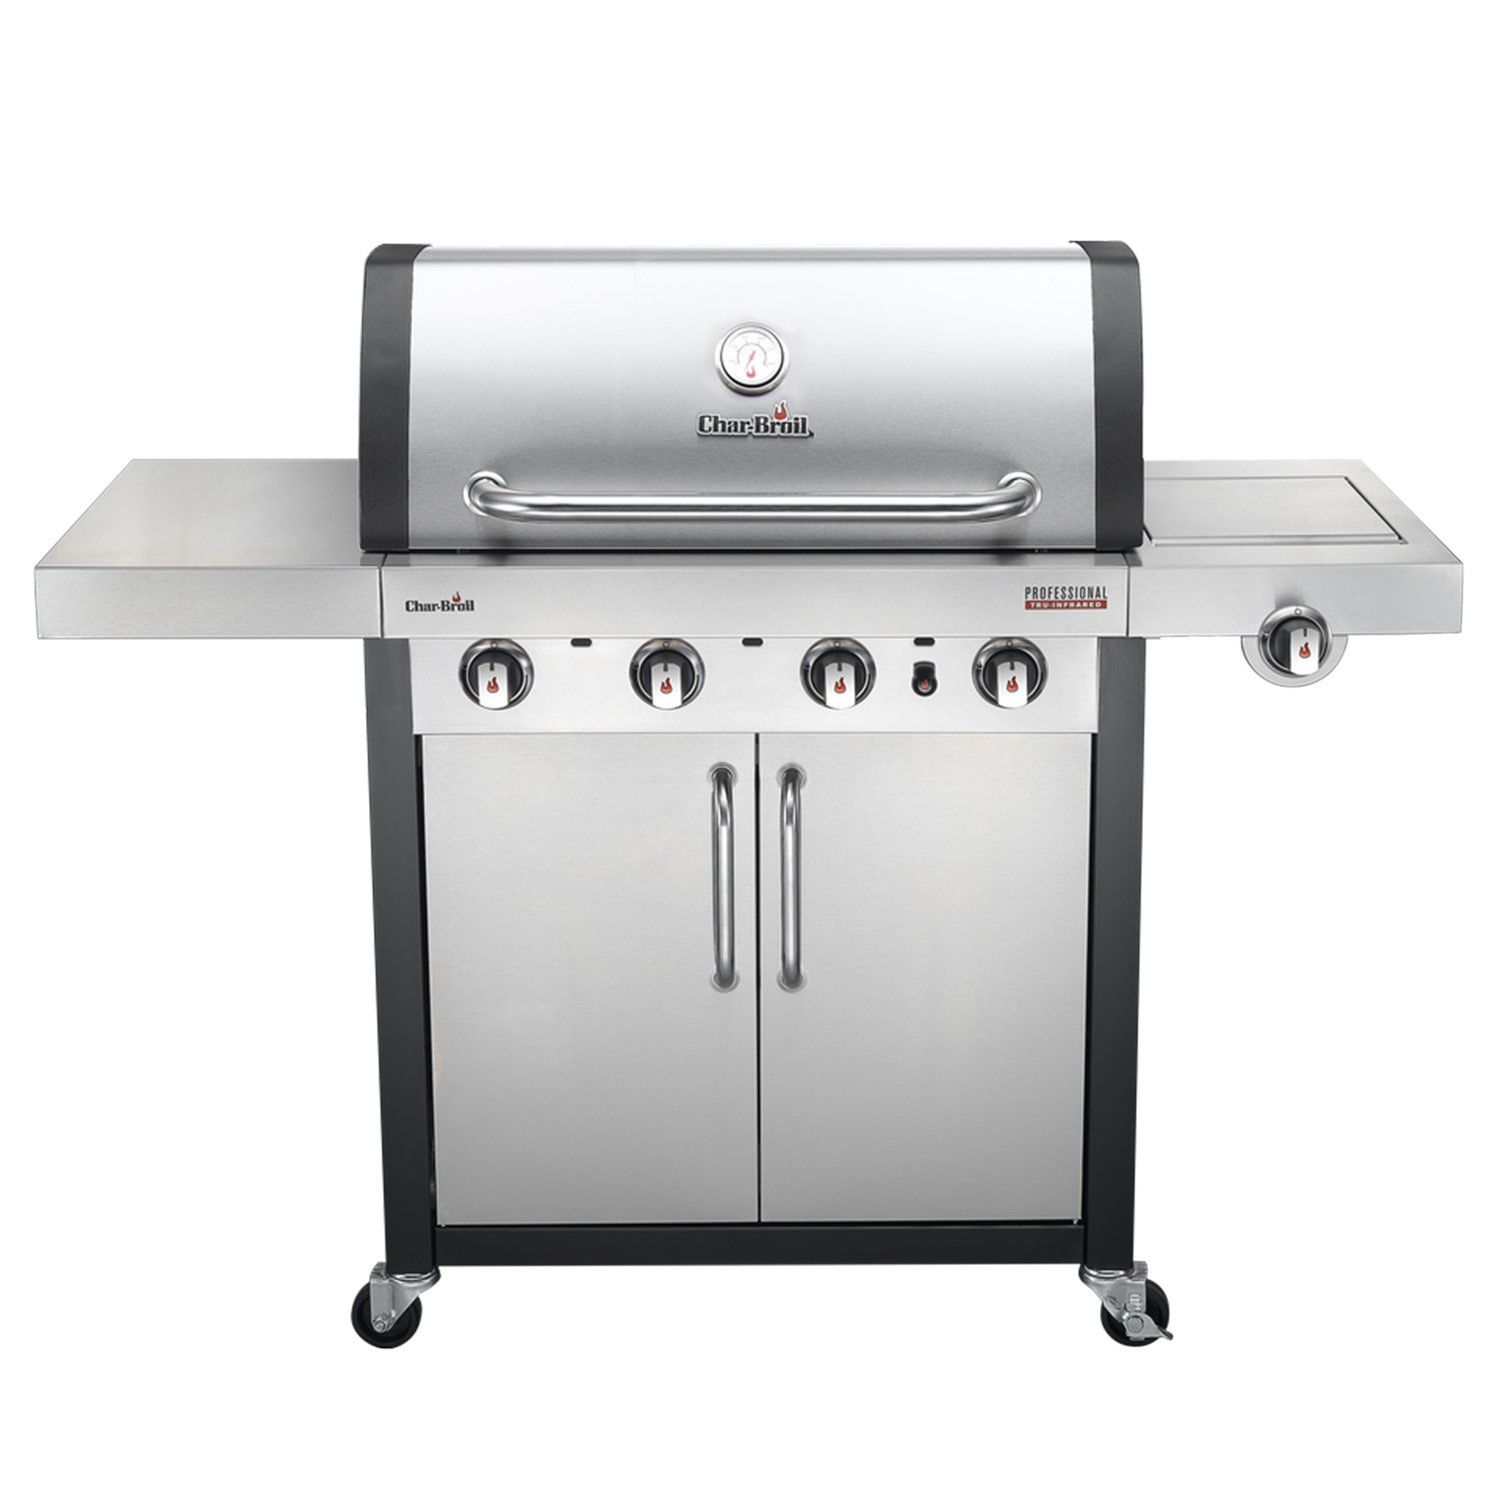 Char-Broil Professional Series 4400S - 4 Burner Gas BBQ Grill with Side Burners - Stainless Steel